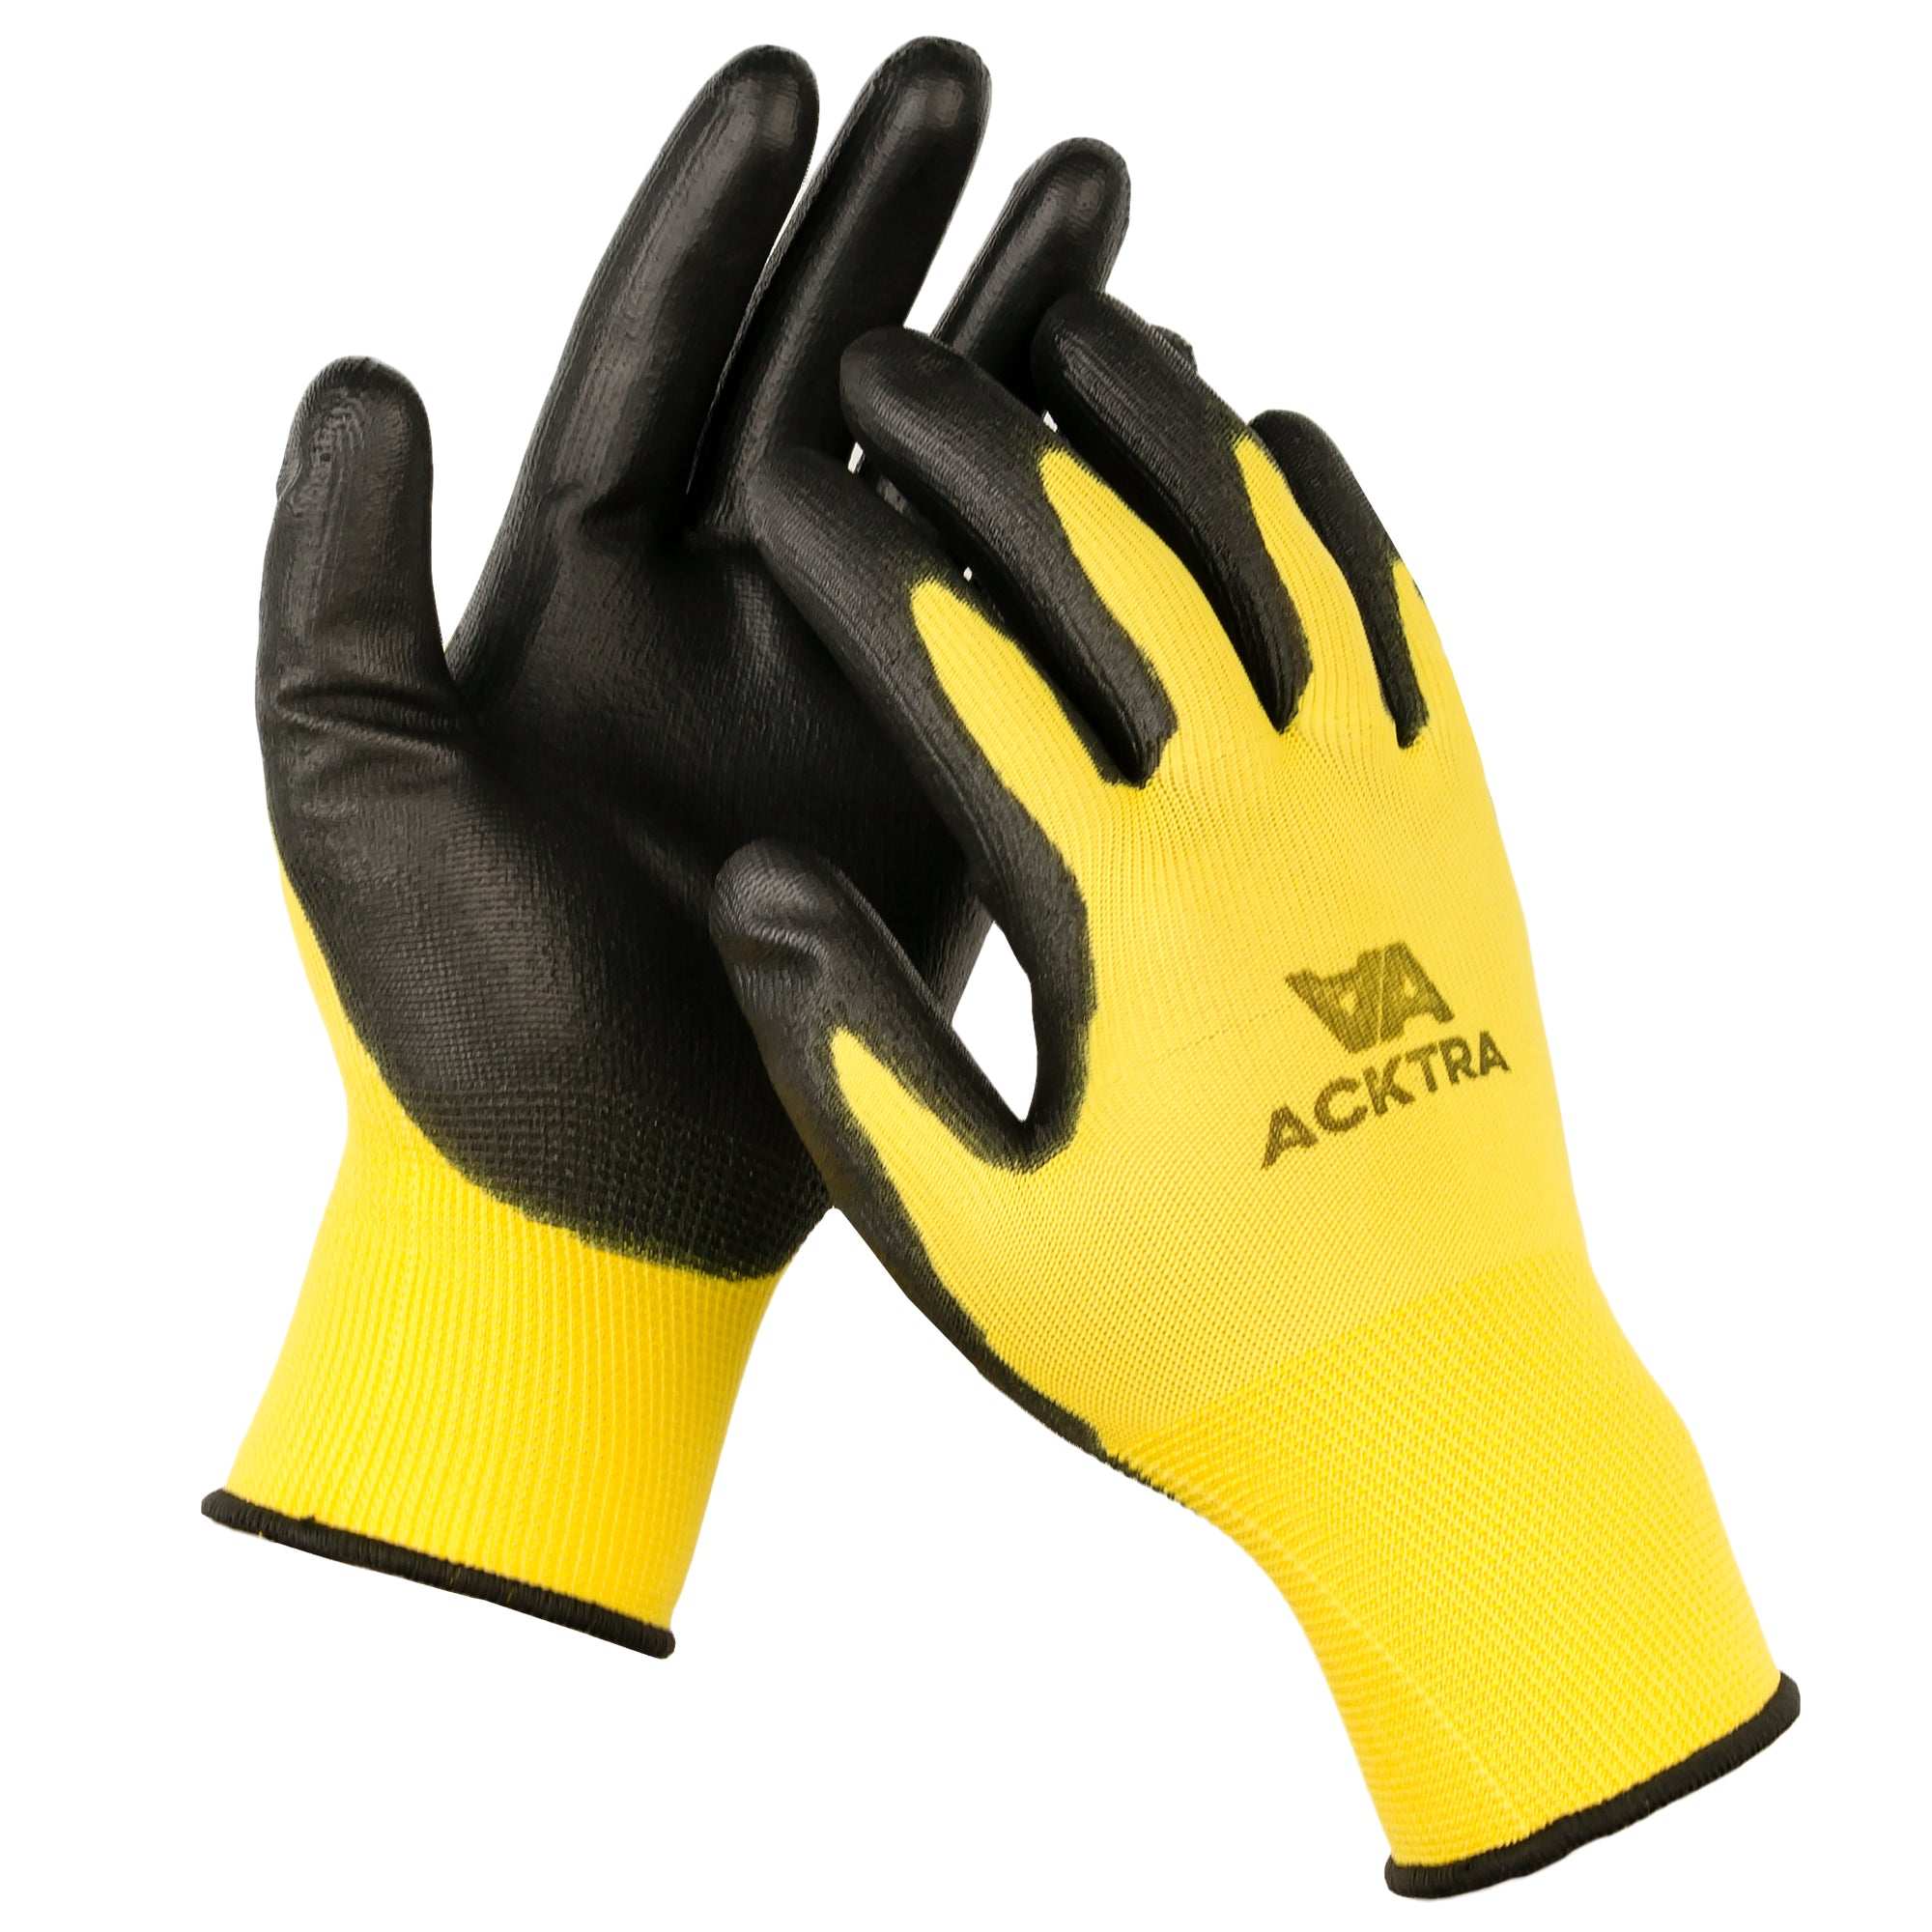 JM-FUHAND Ultra-Thin Polyurethane(PU) Coated safety Work Gloves-12  Pairs,for Men and Women,for Precision Work,Ideal for Light Duty